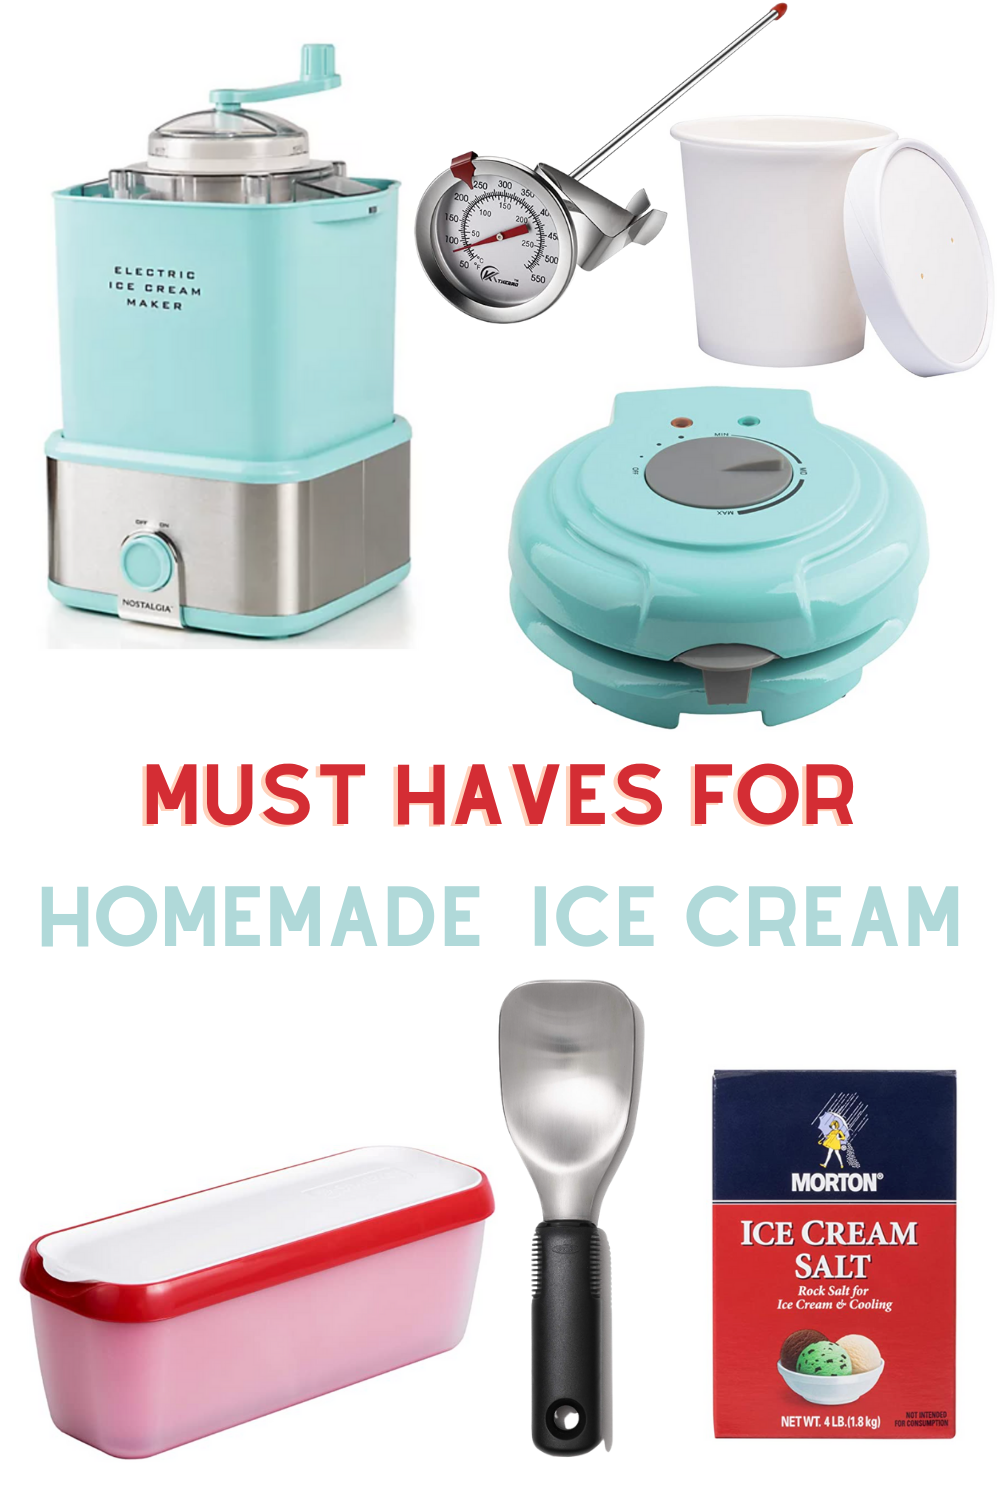 https://blog.effortless-style.com/wp-content/uploads/must-haves-for-homemade-ice-cream.png